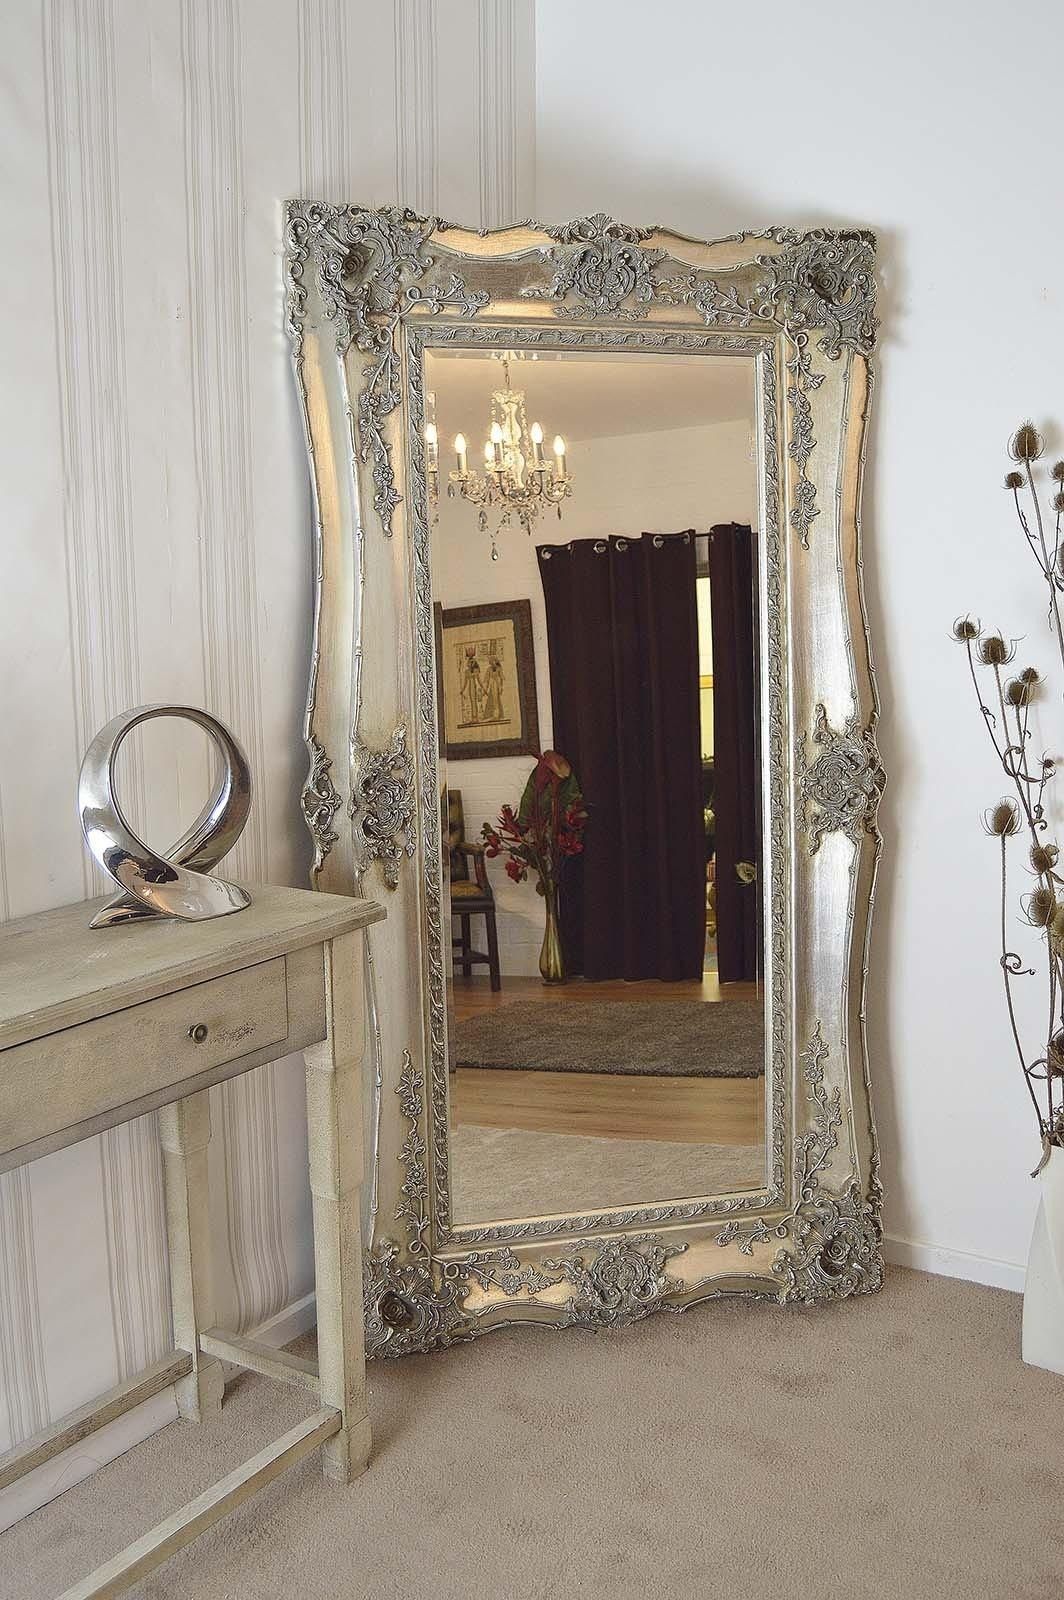 Large Silver Wall Mirror 57 Nice Decorating With Large Ornate Wall With Silver Ornate Mirrors (View 6 of 20)